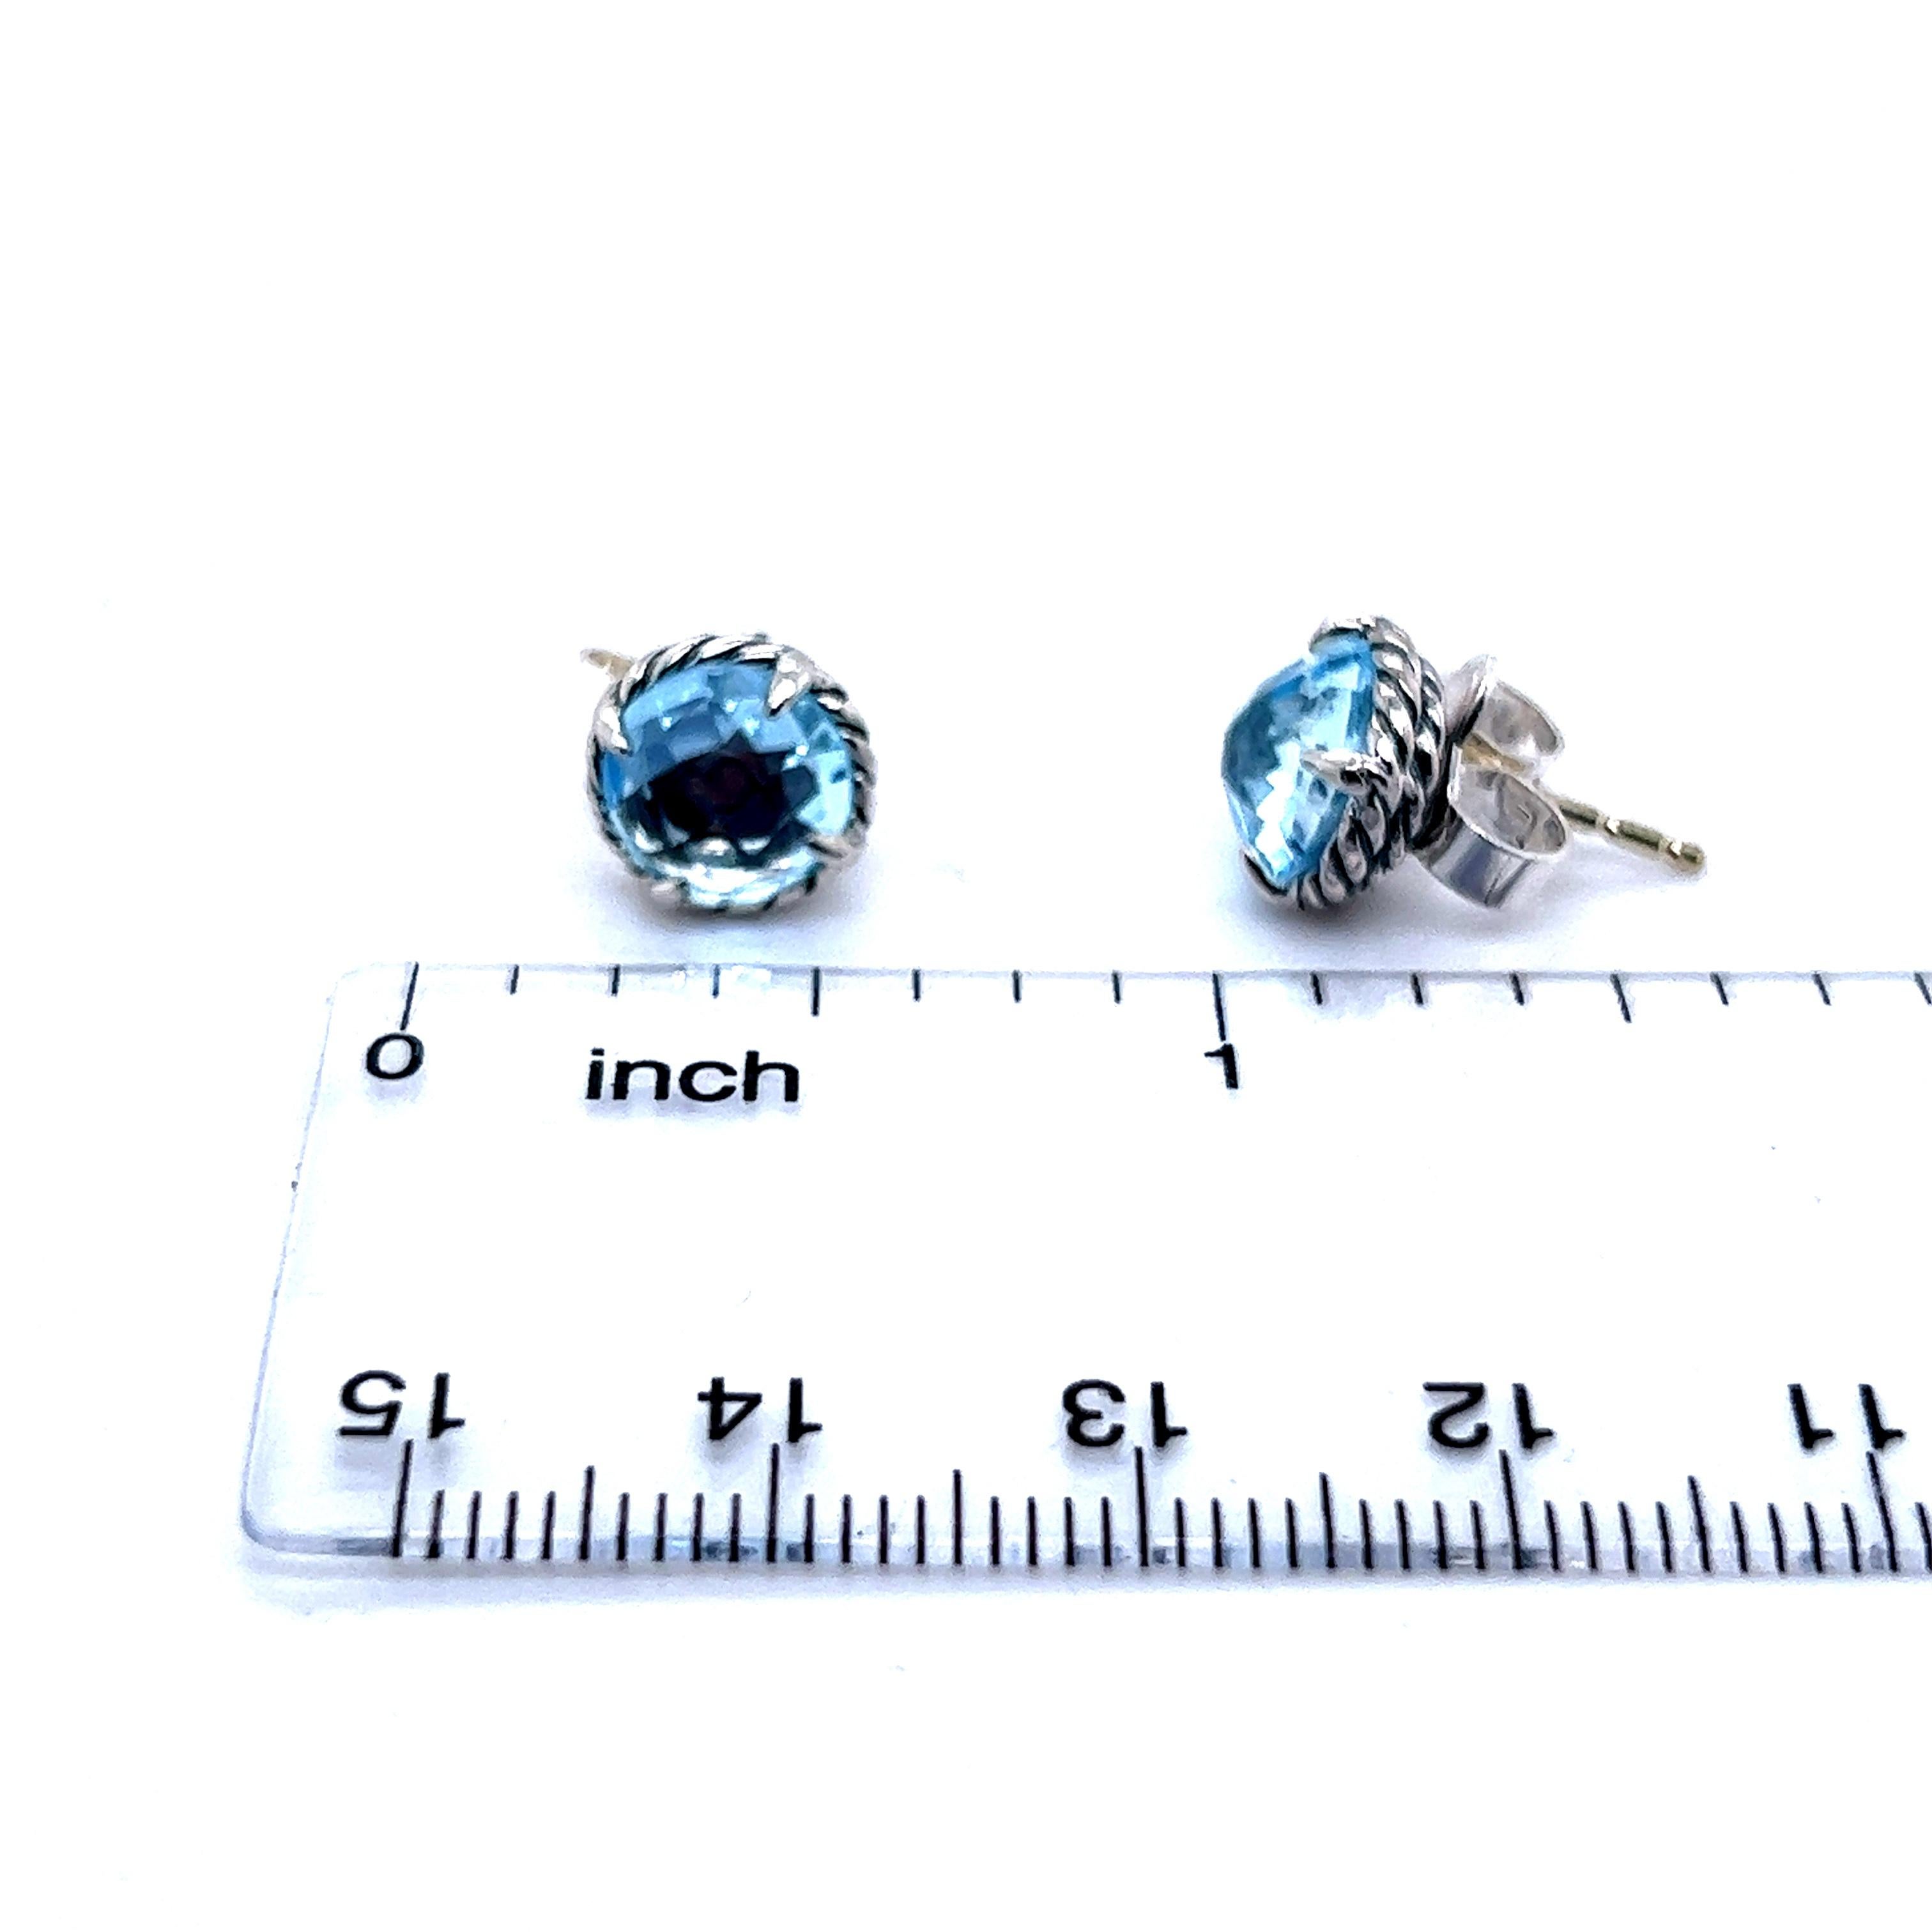 Authentic David Yurman Estate Blue Topaz Chantelaine Earrings 5.30 Cts Silver DY238

Retail: $475

TRUSTED SELLER SINCE 2002

PLEASE SEE OUR HUNDREDS OF POSITIVE FEEDBACKS FROM OUR CLIENTS!!

FREE SHIPPING

DETAILS
Blue Topaz 5.30 Cts
Stones: 8